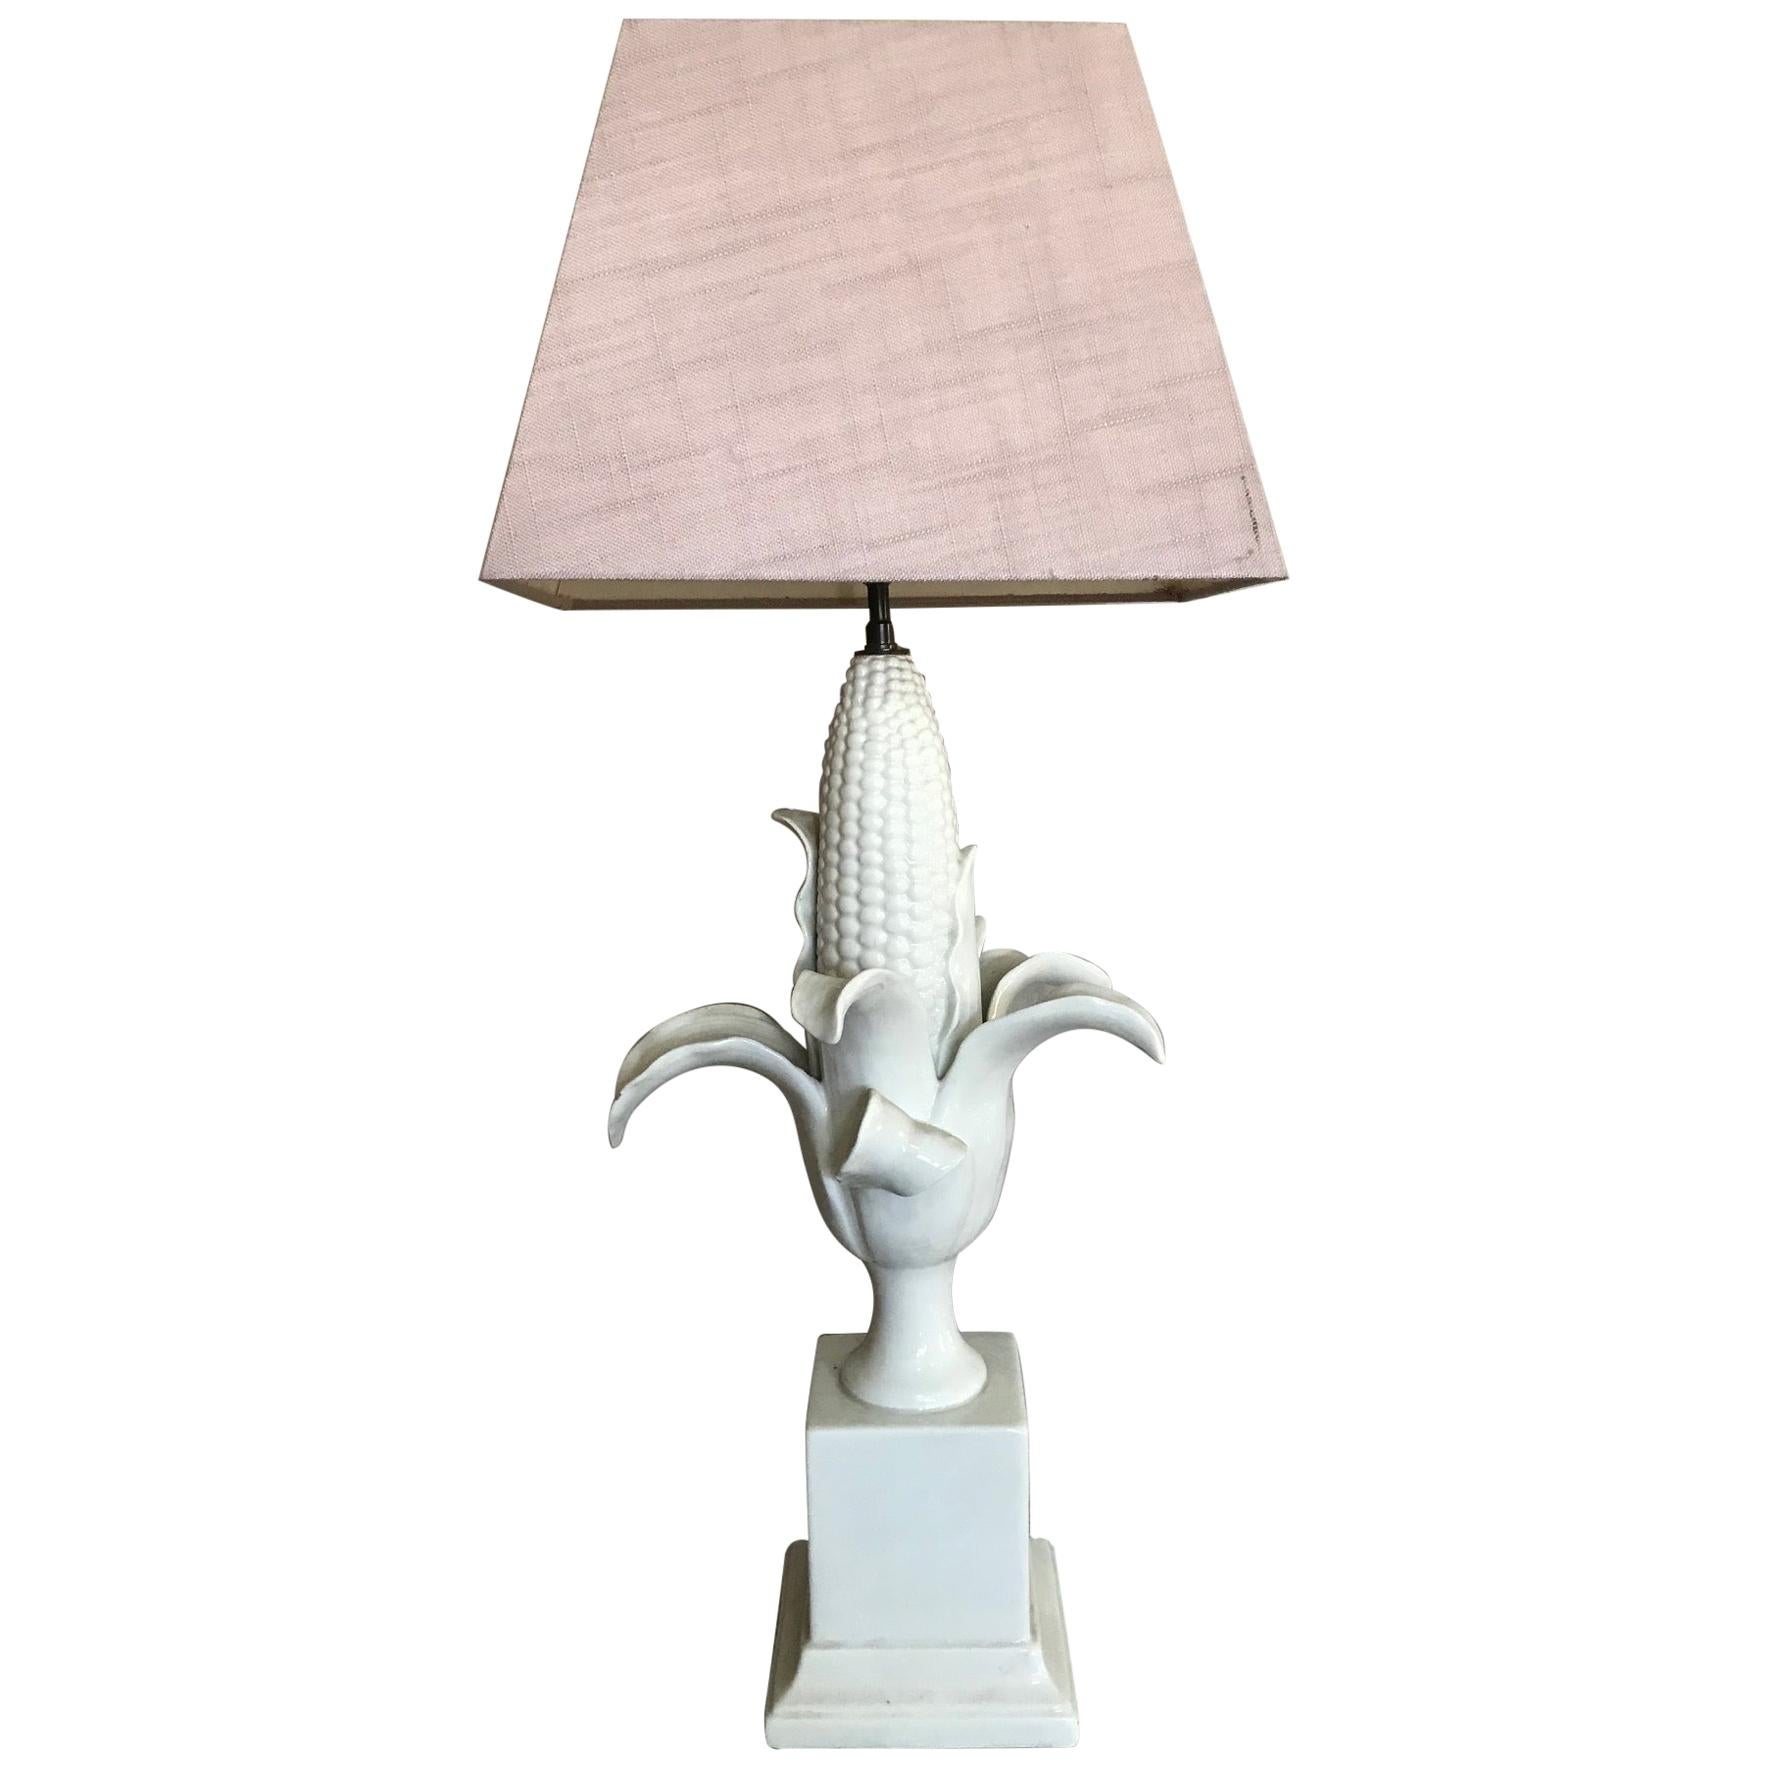 20th Century French Earthenware Corn Table Lamp, 1950s For Sale